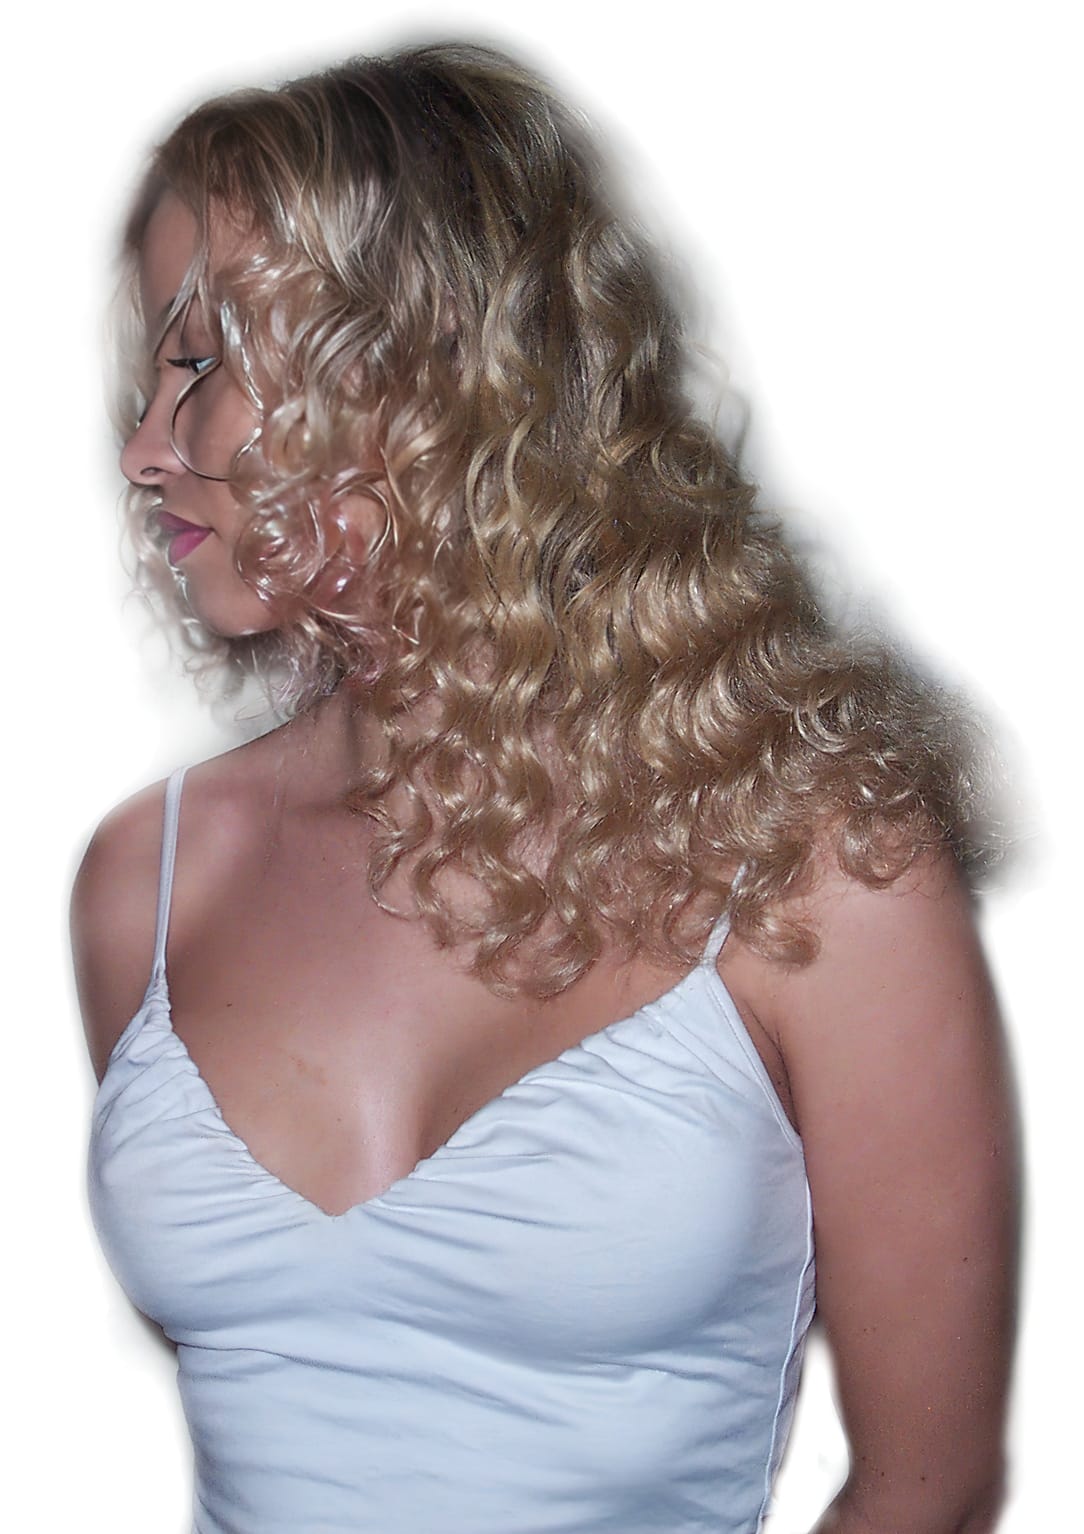 After Picture - Latex Bonded Hair Extension Damage Restored